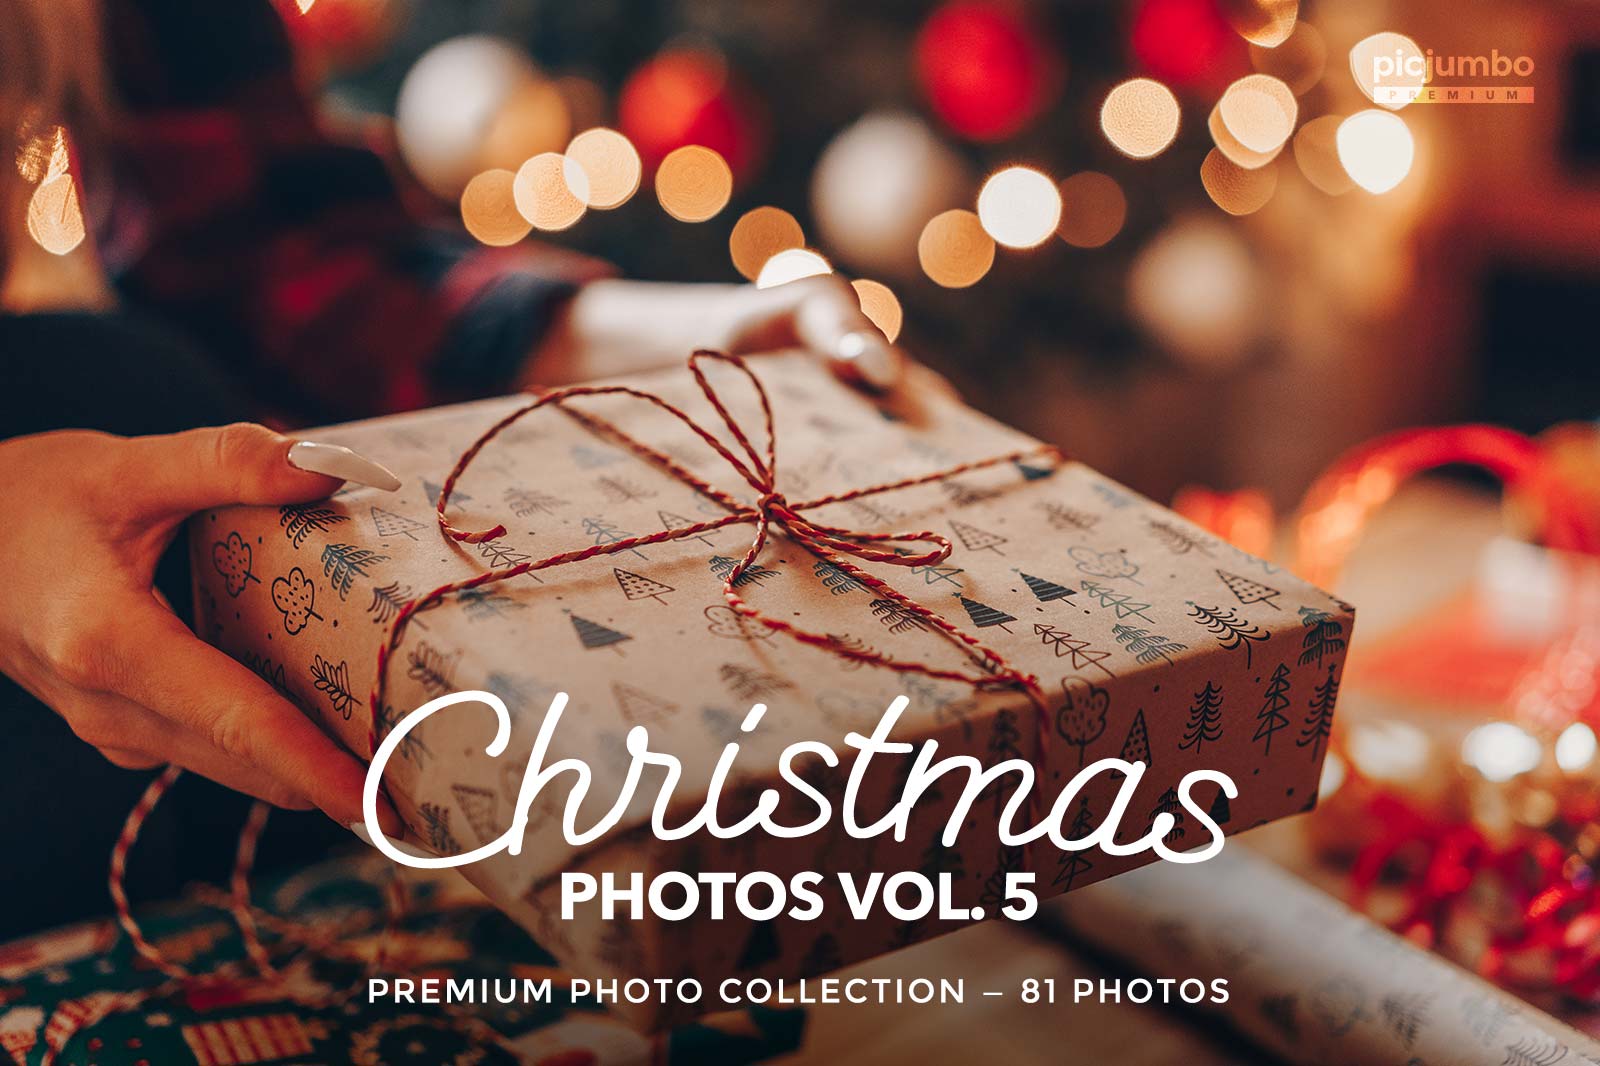 Download hi-res stock photos from our collection Christmas Photos Vol. 5: gift wrapping, sweet morning breakfast, fresh yummy tangerine and more!